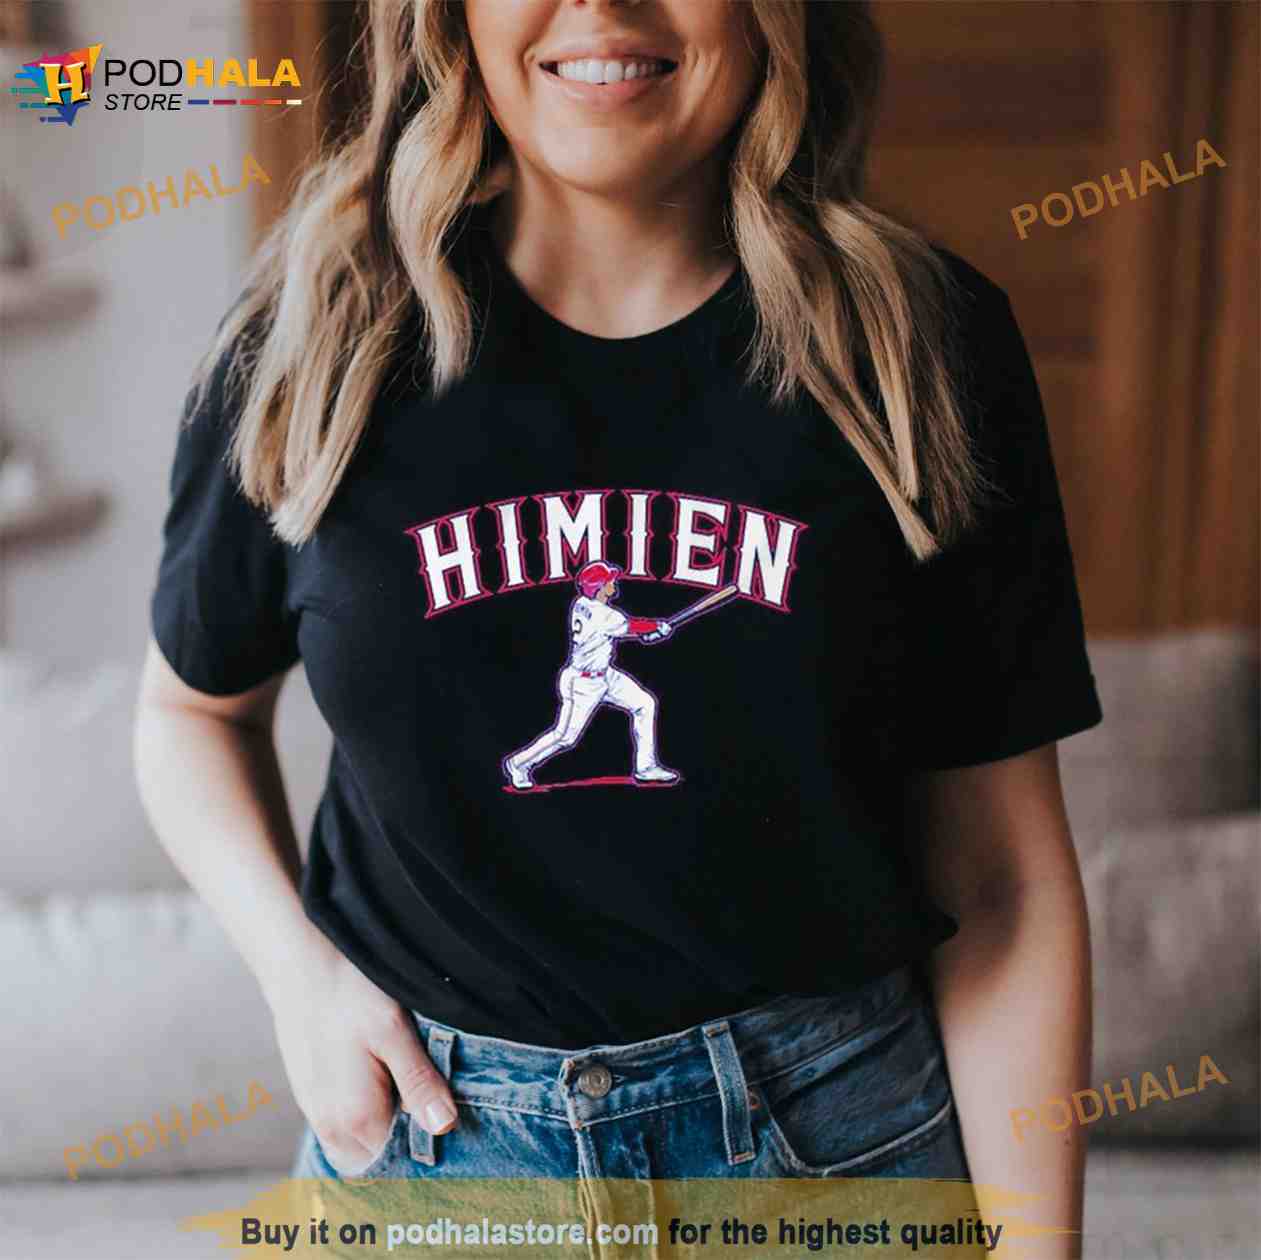 hIMien Marcus Semien Texas Rangers baseball Shirt - Bring Your Ideas,  Thoughts And Imaginations Into Reality Today